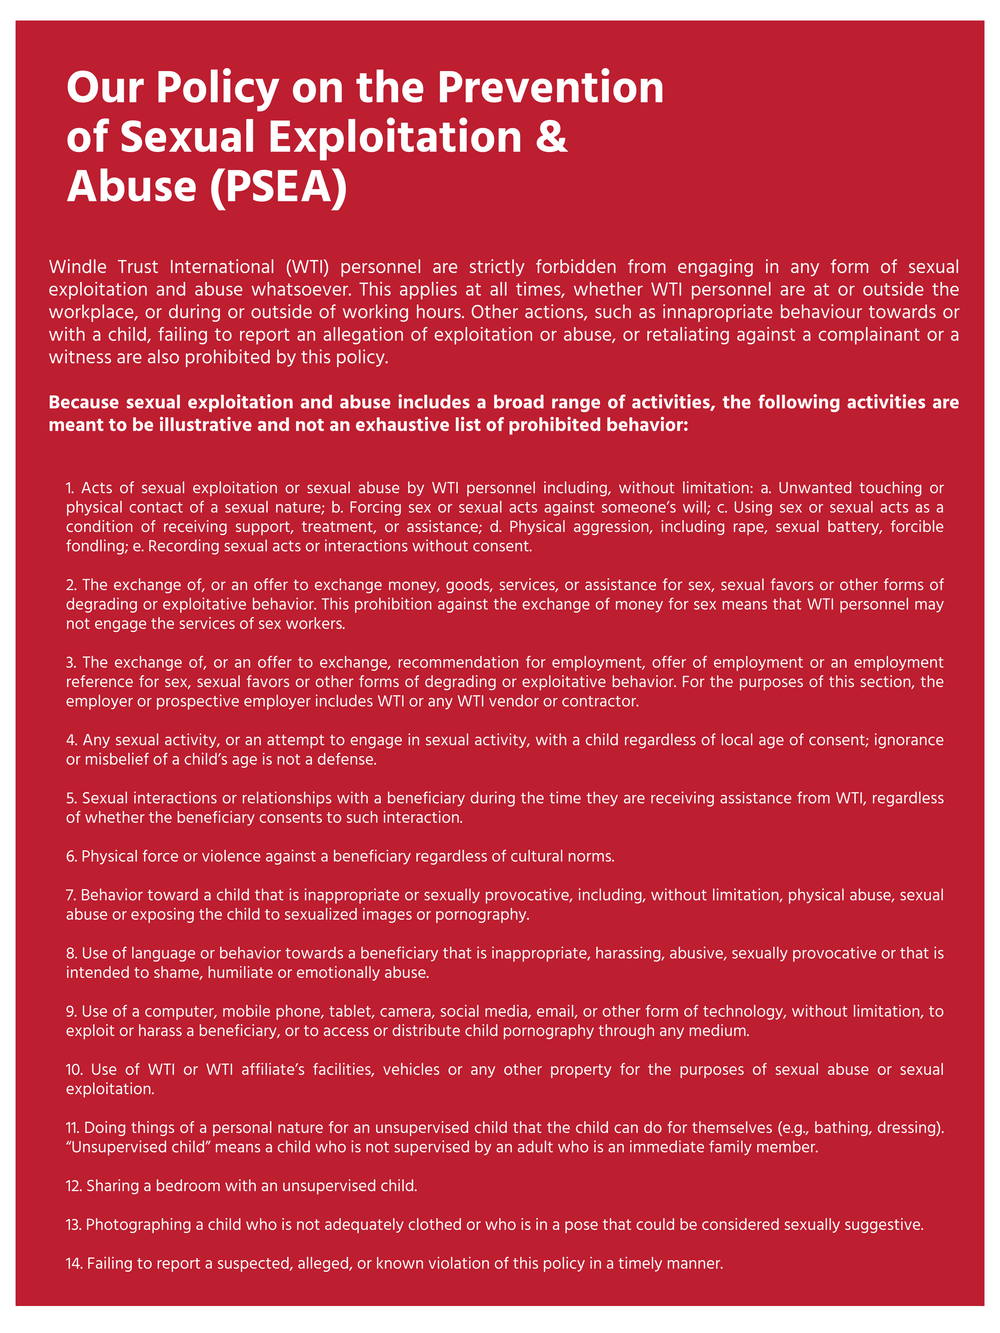 PSEA Policy 1.png